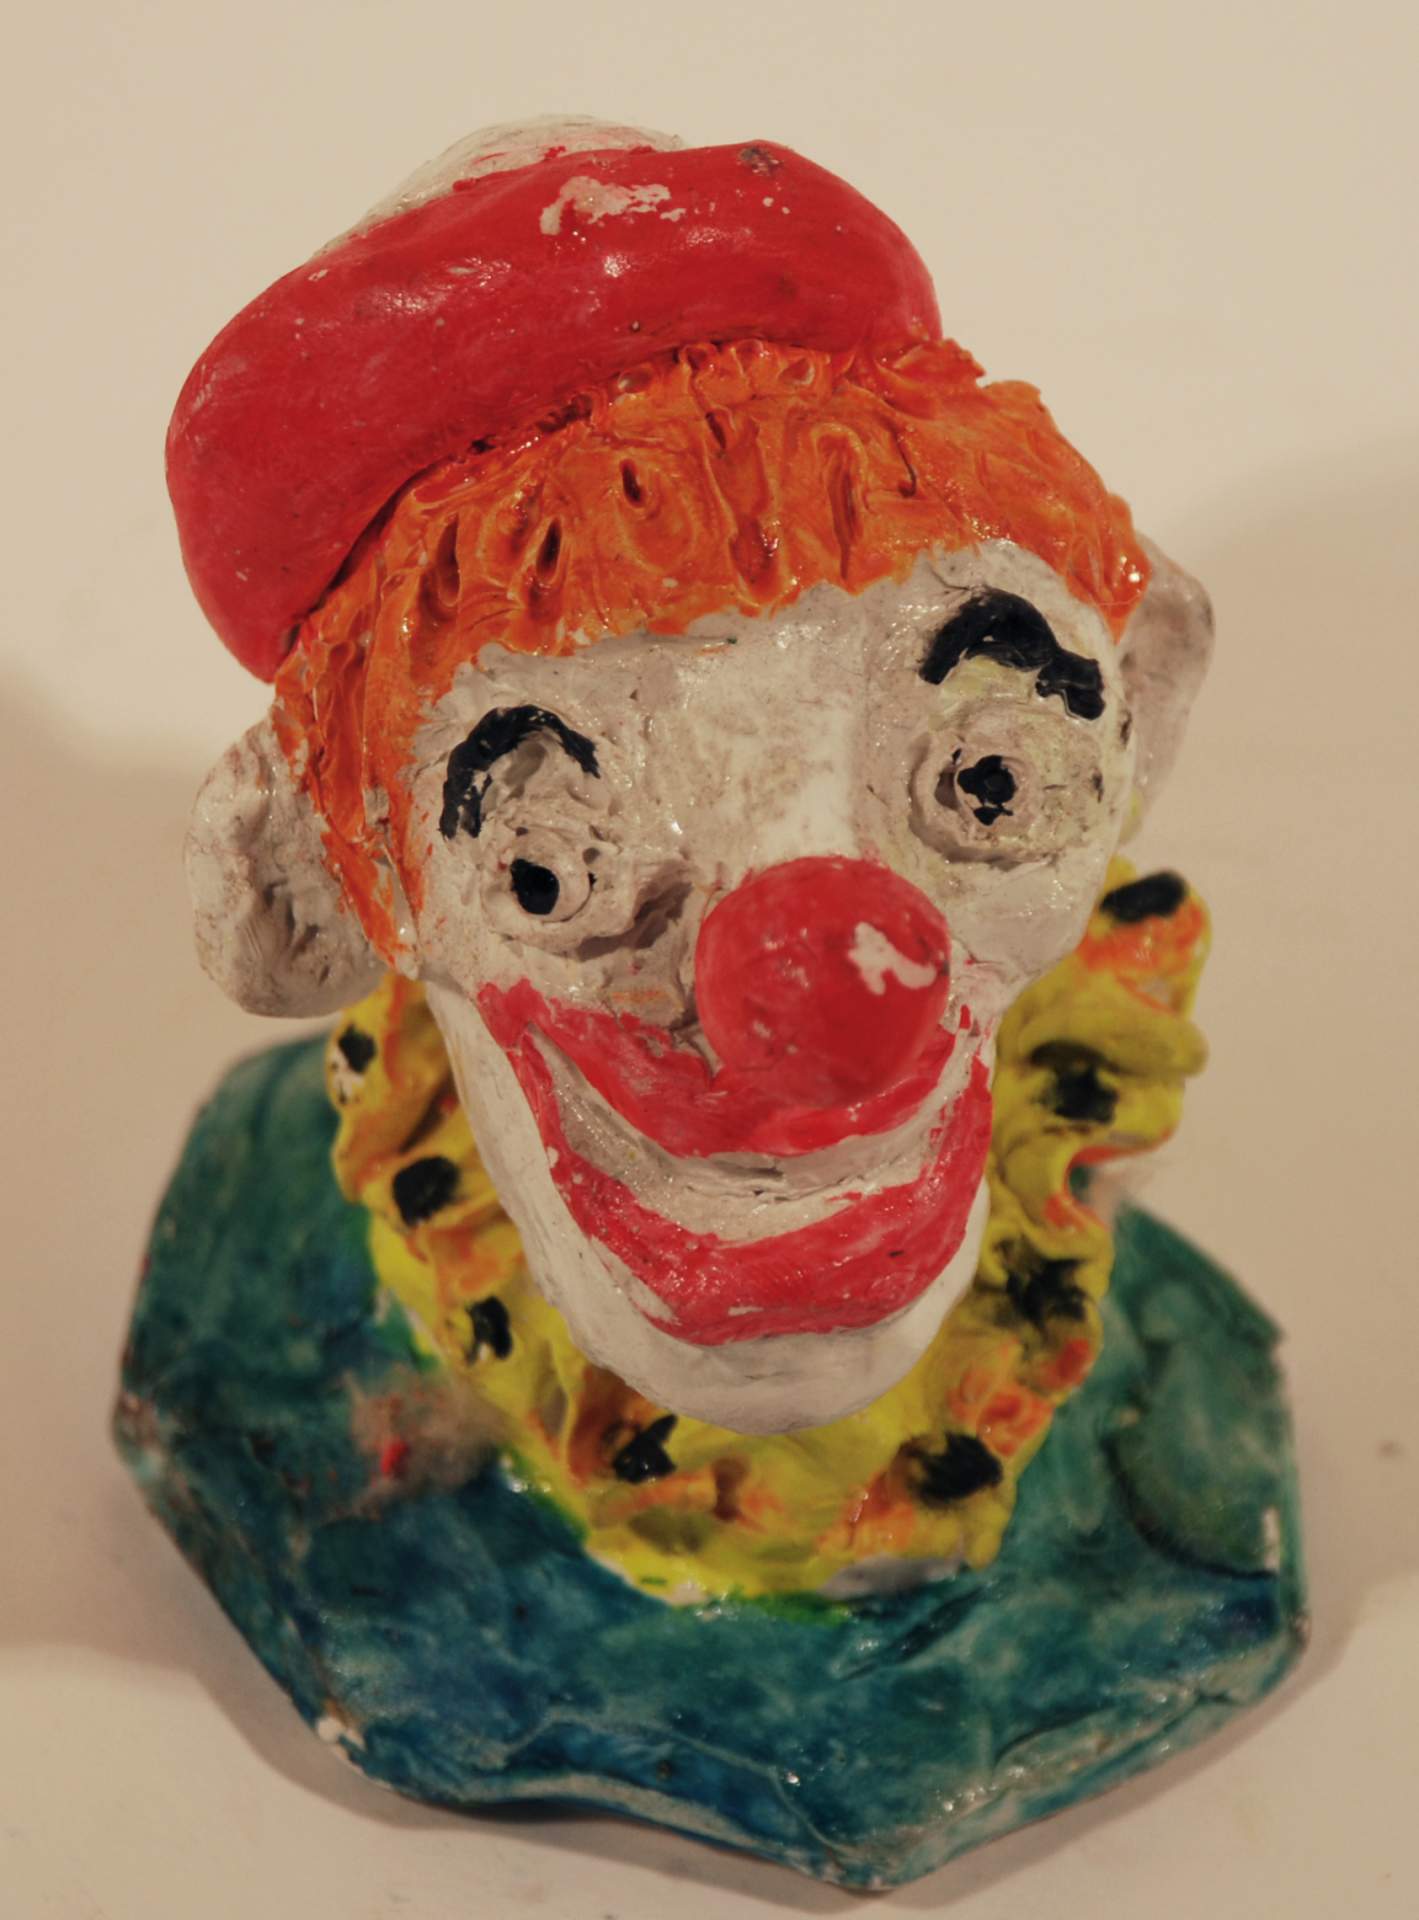 Untitled [Clown with white and red hat]